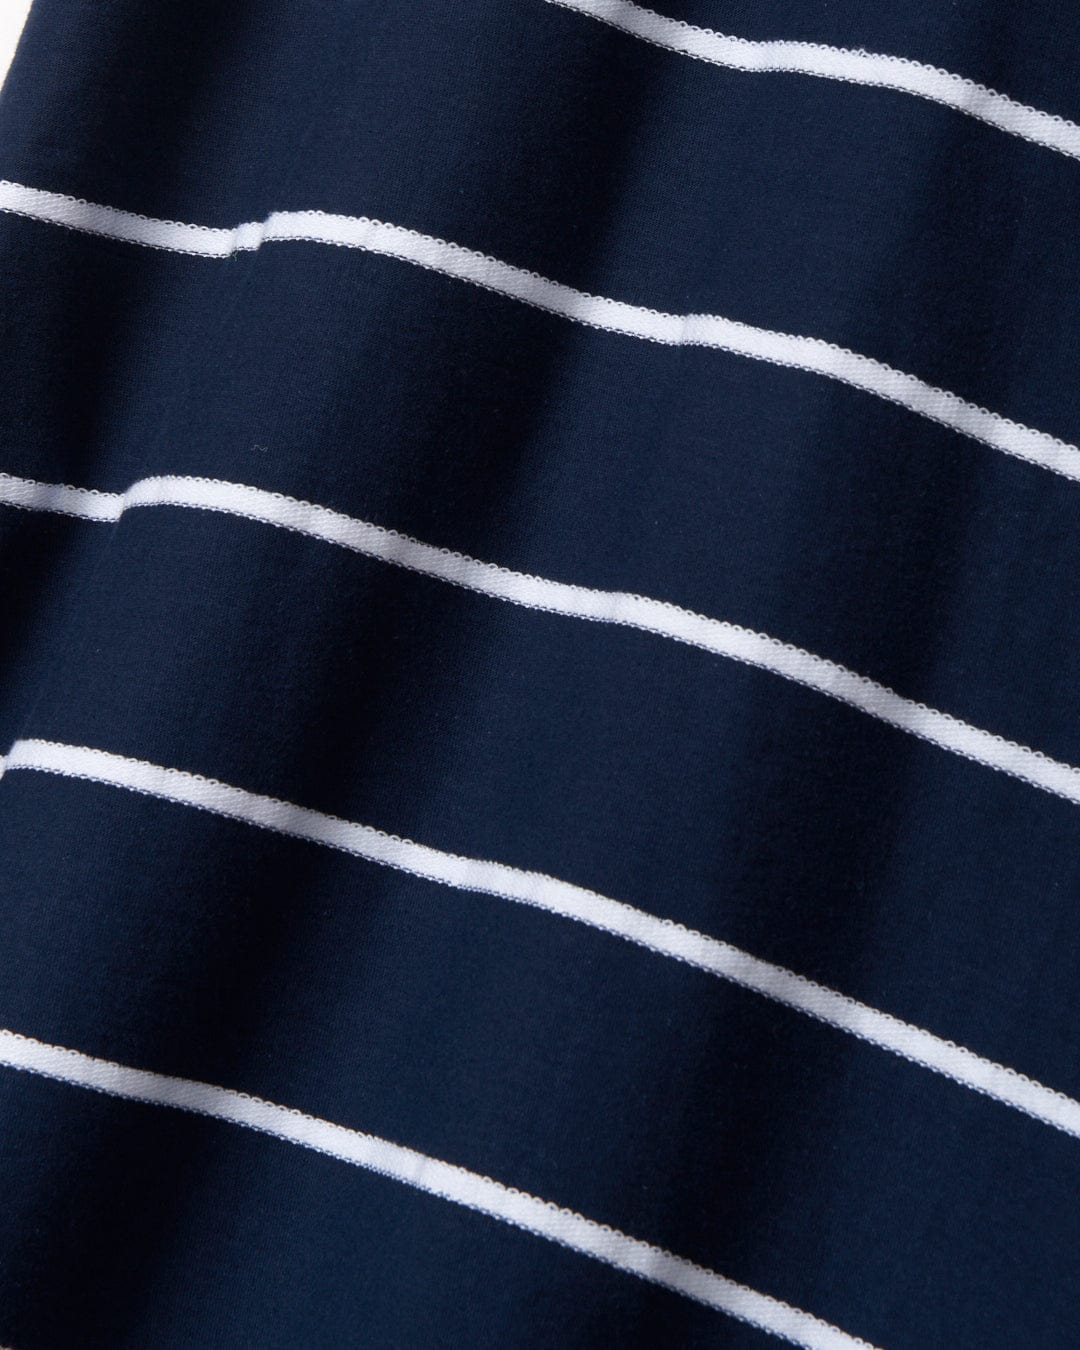 A close up of the Saltrock Hartland Cap - Womens Dress - Navy with a peached soft hand feel finish.